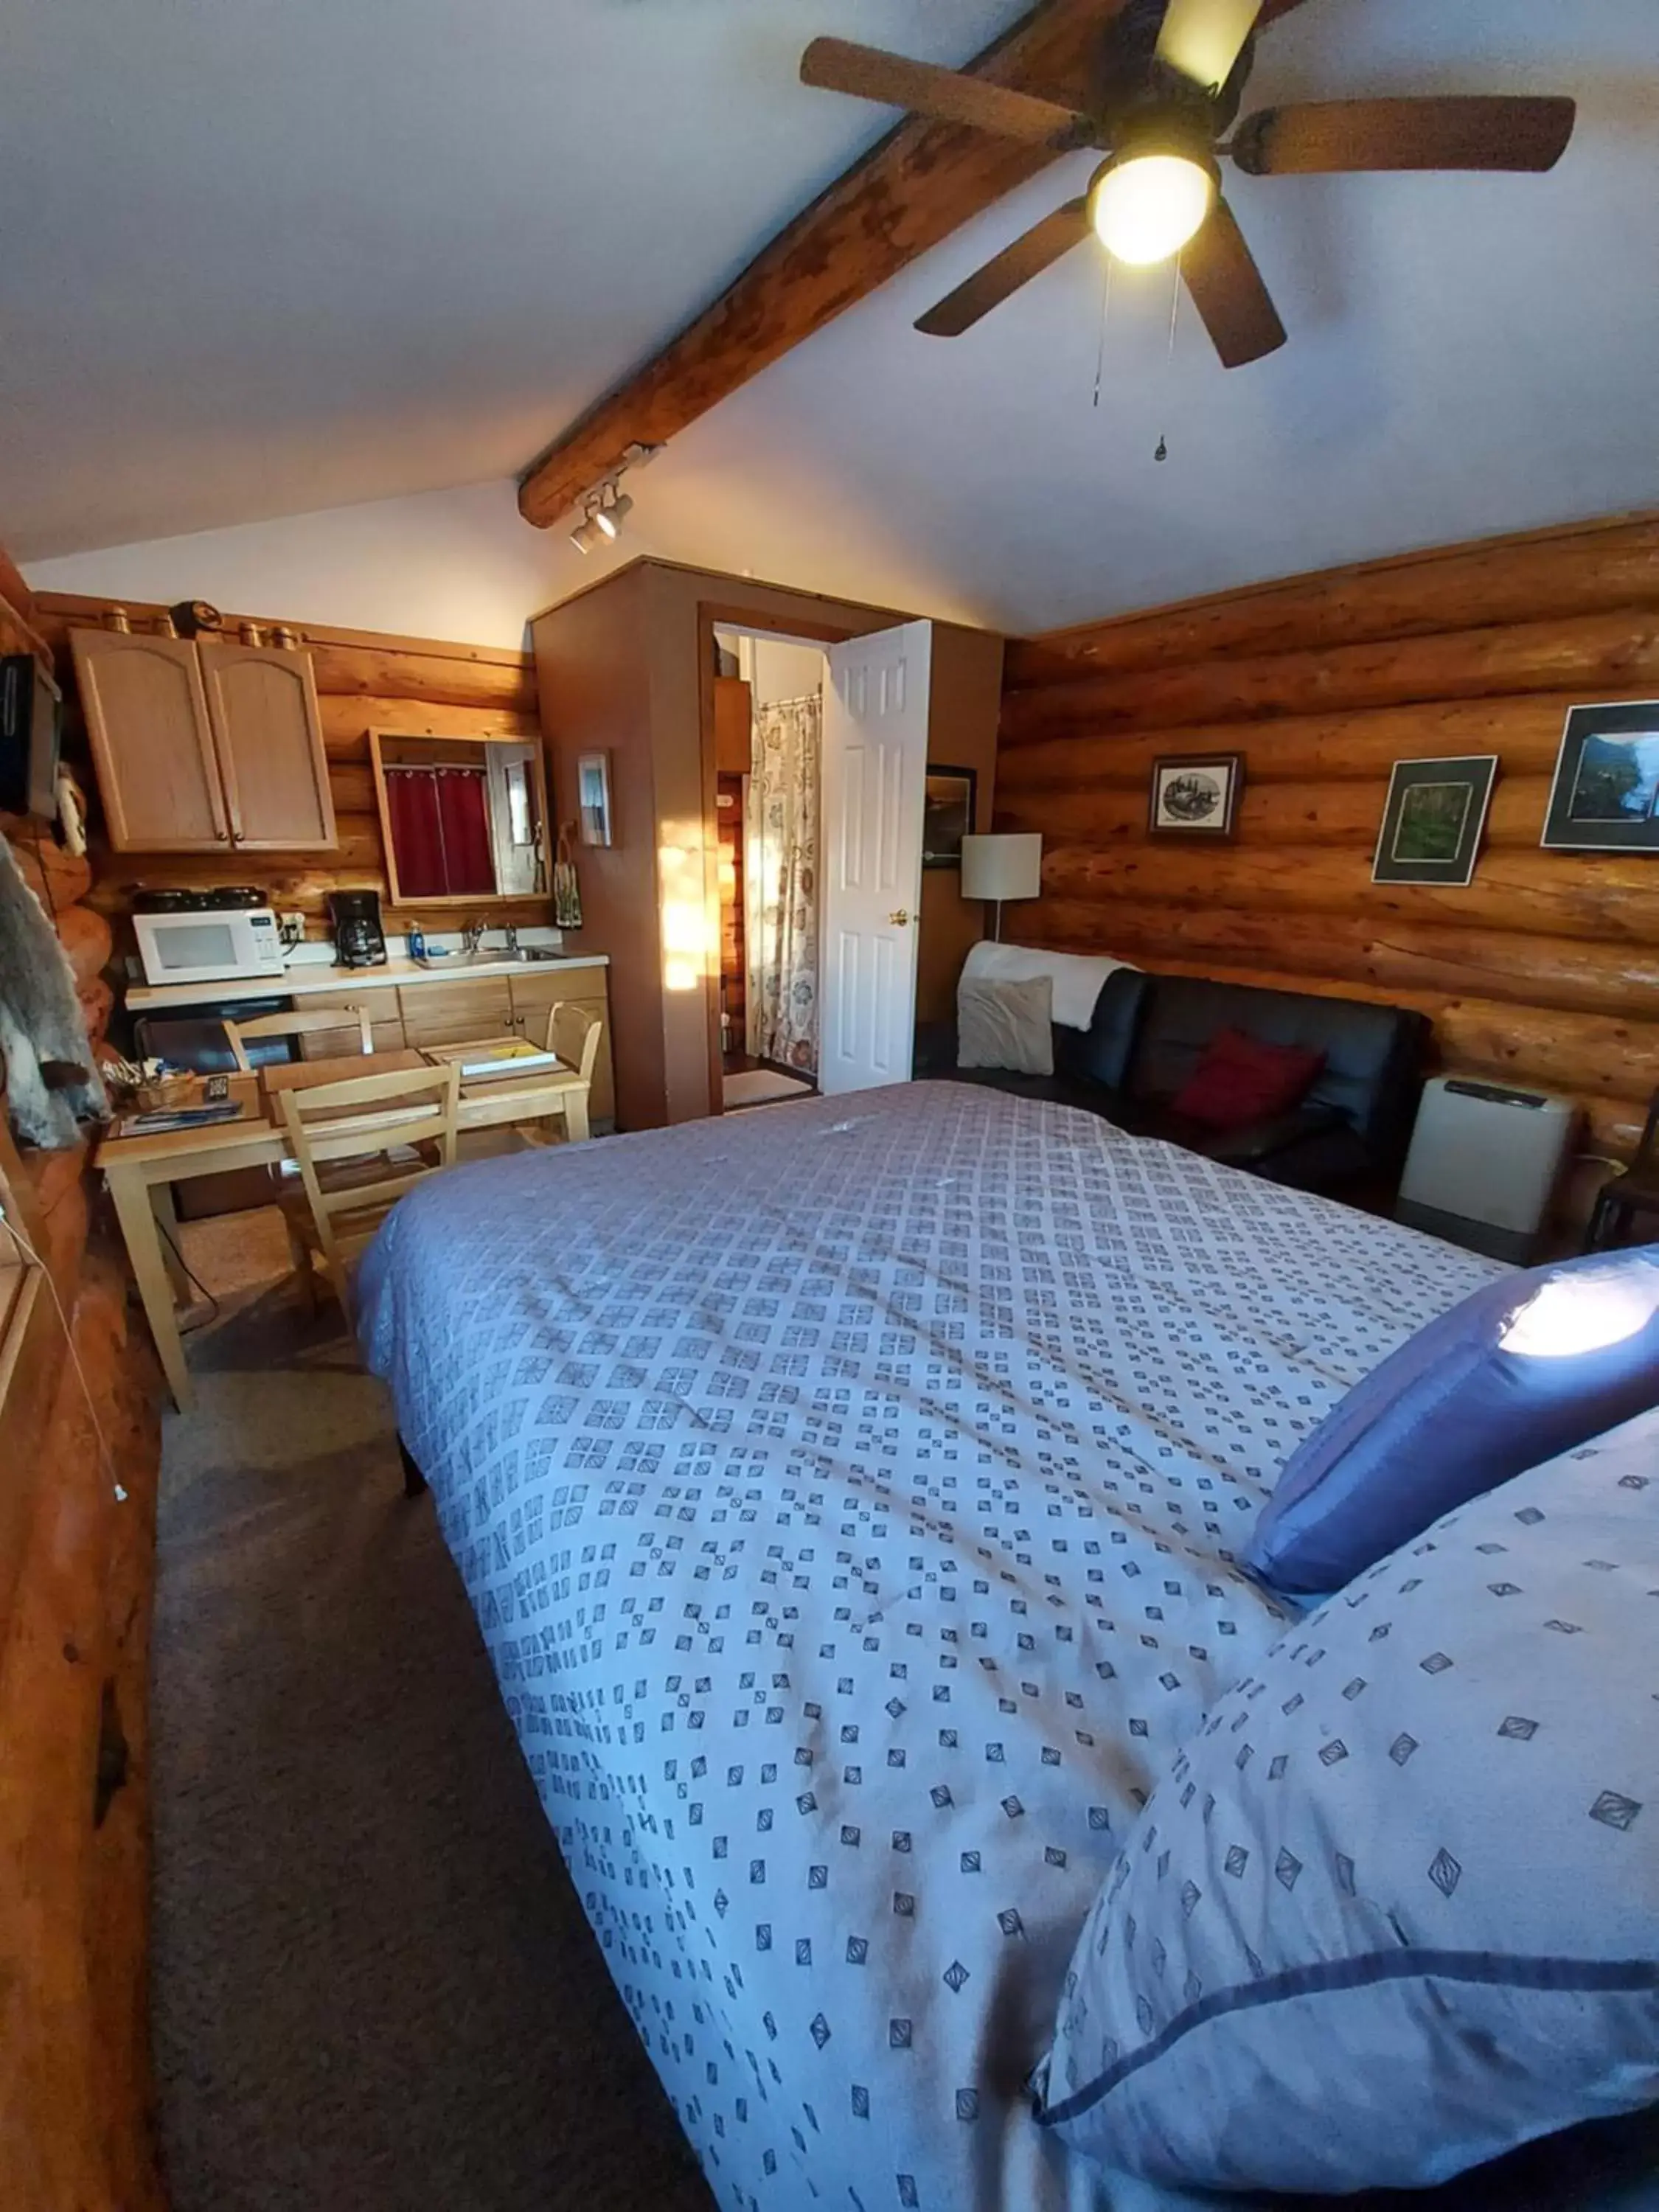 Bed in Hatcher Pass Cabins